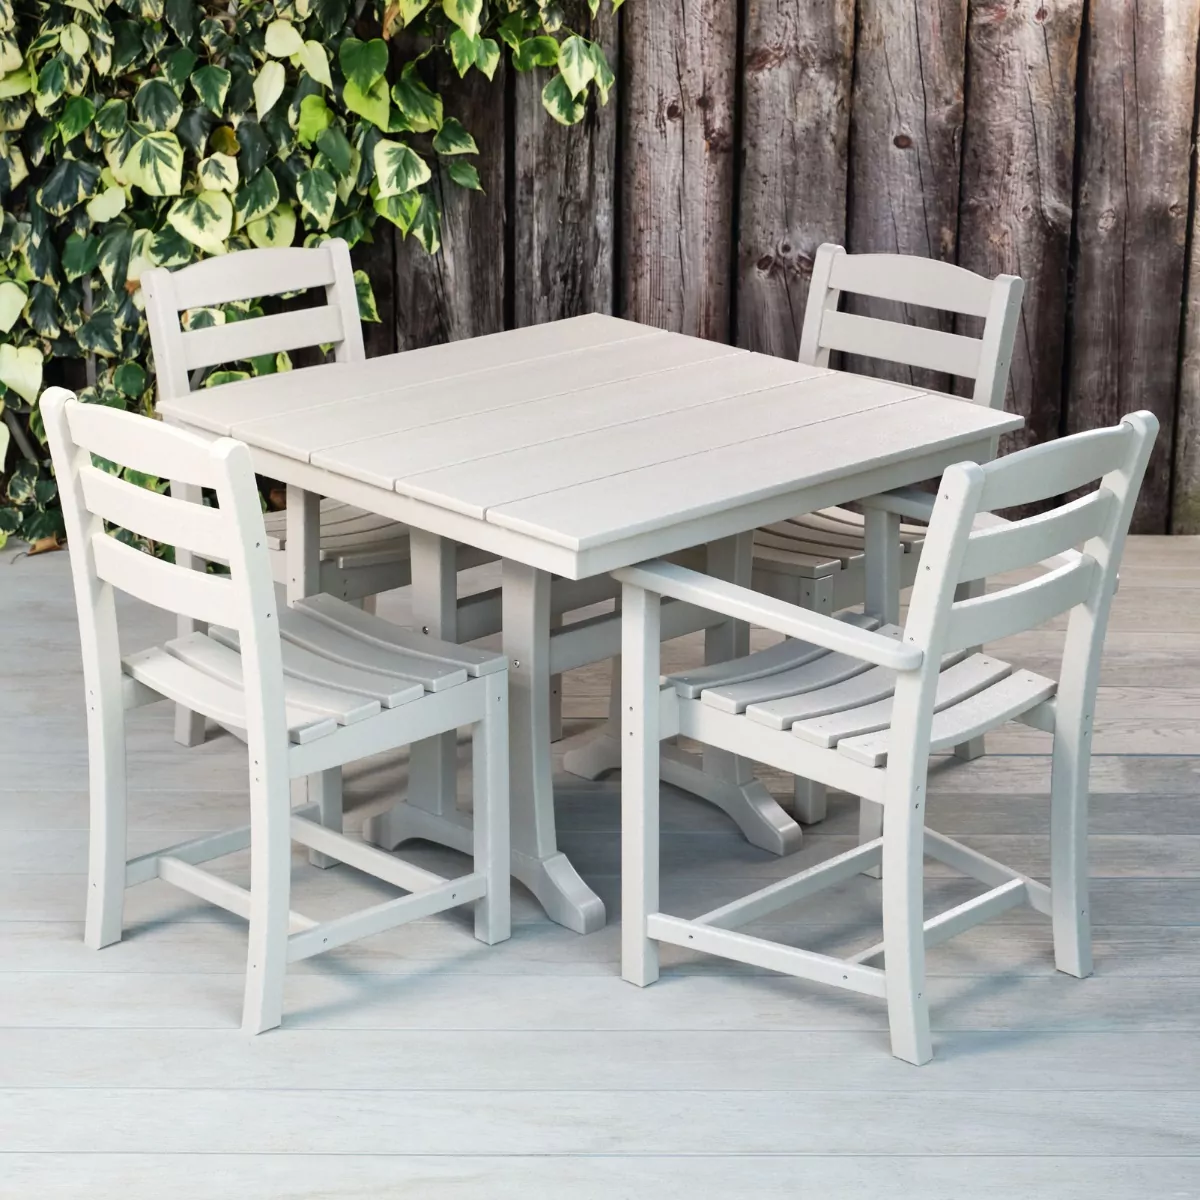 Recycled-Plastic-Square-Outdoor-Table-and-4-Chairs-Cream-Colour.jpg